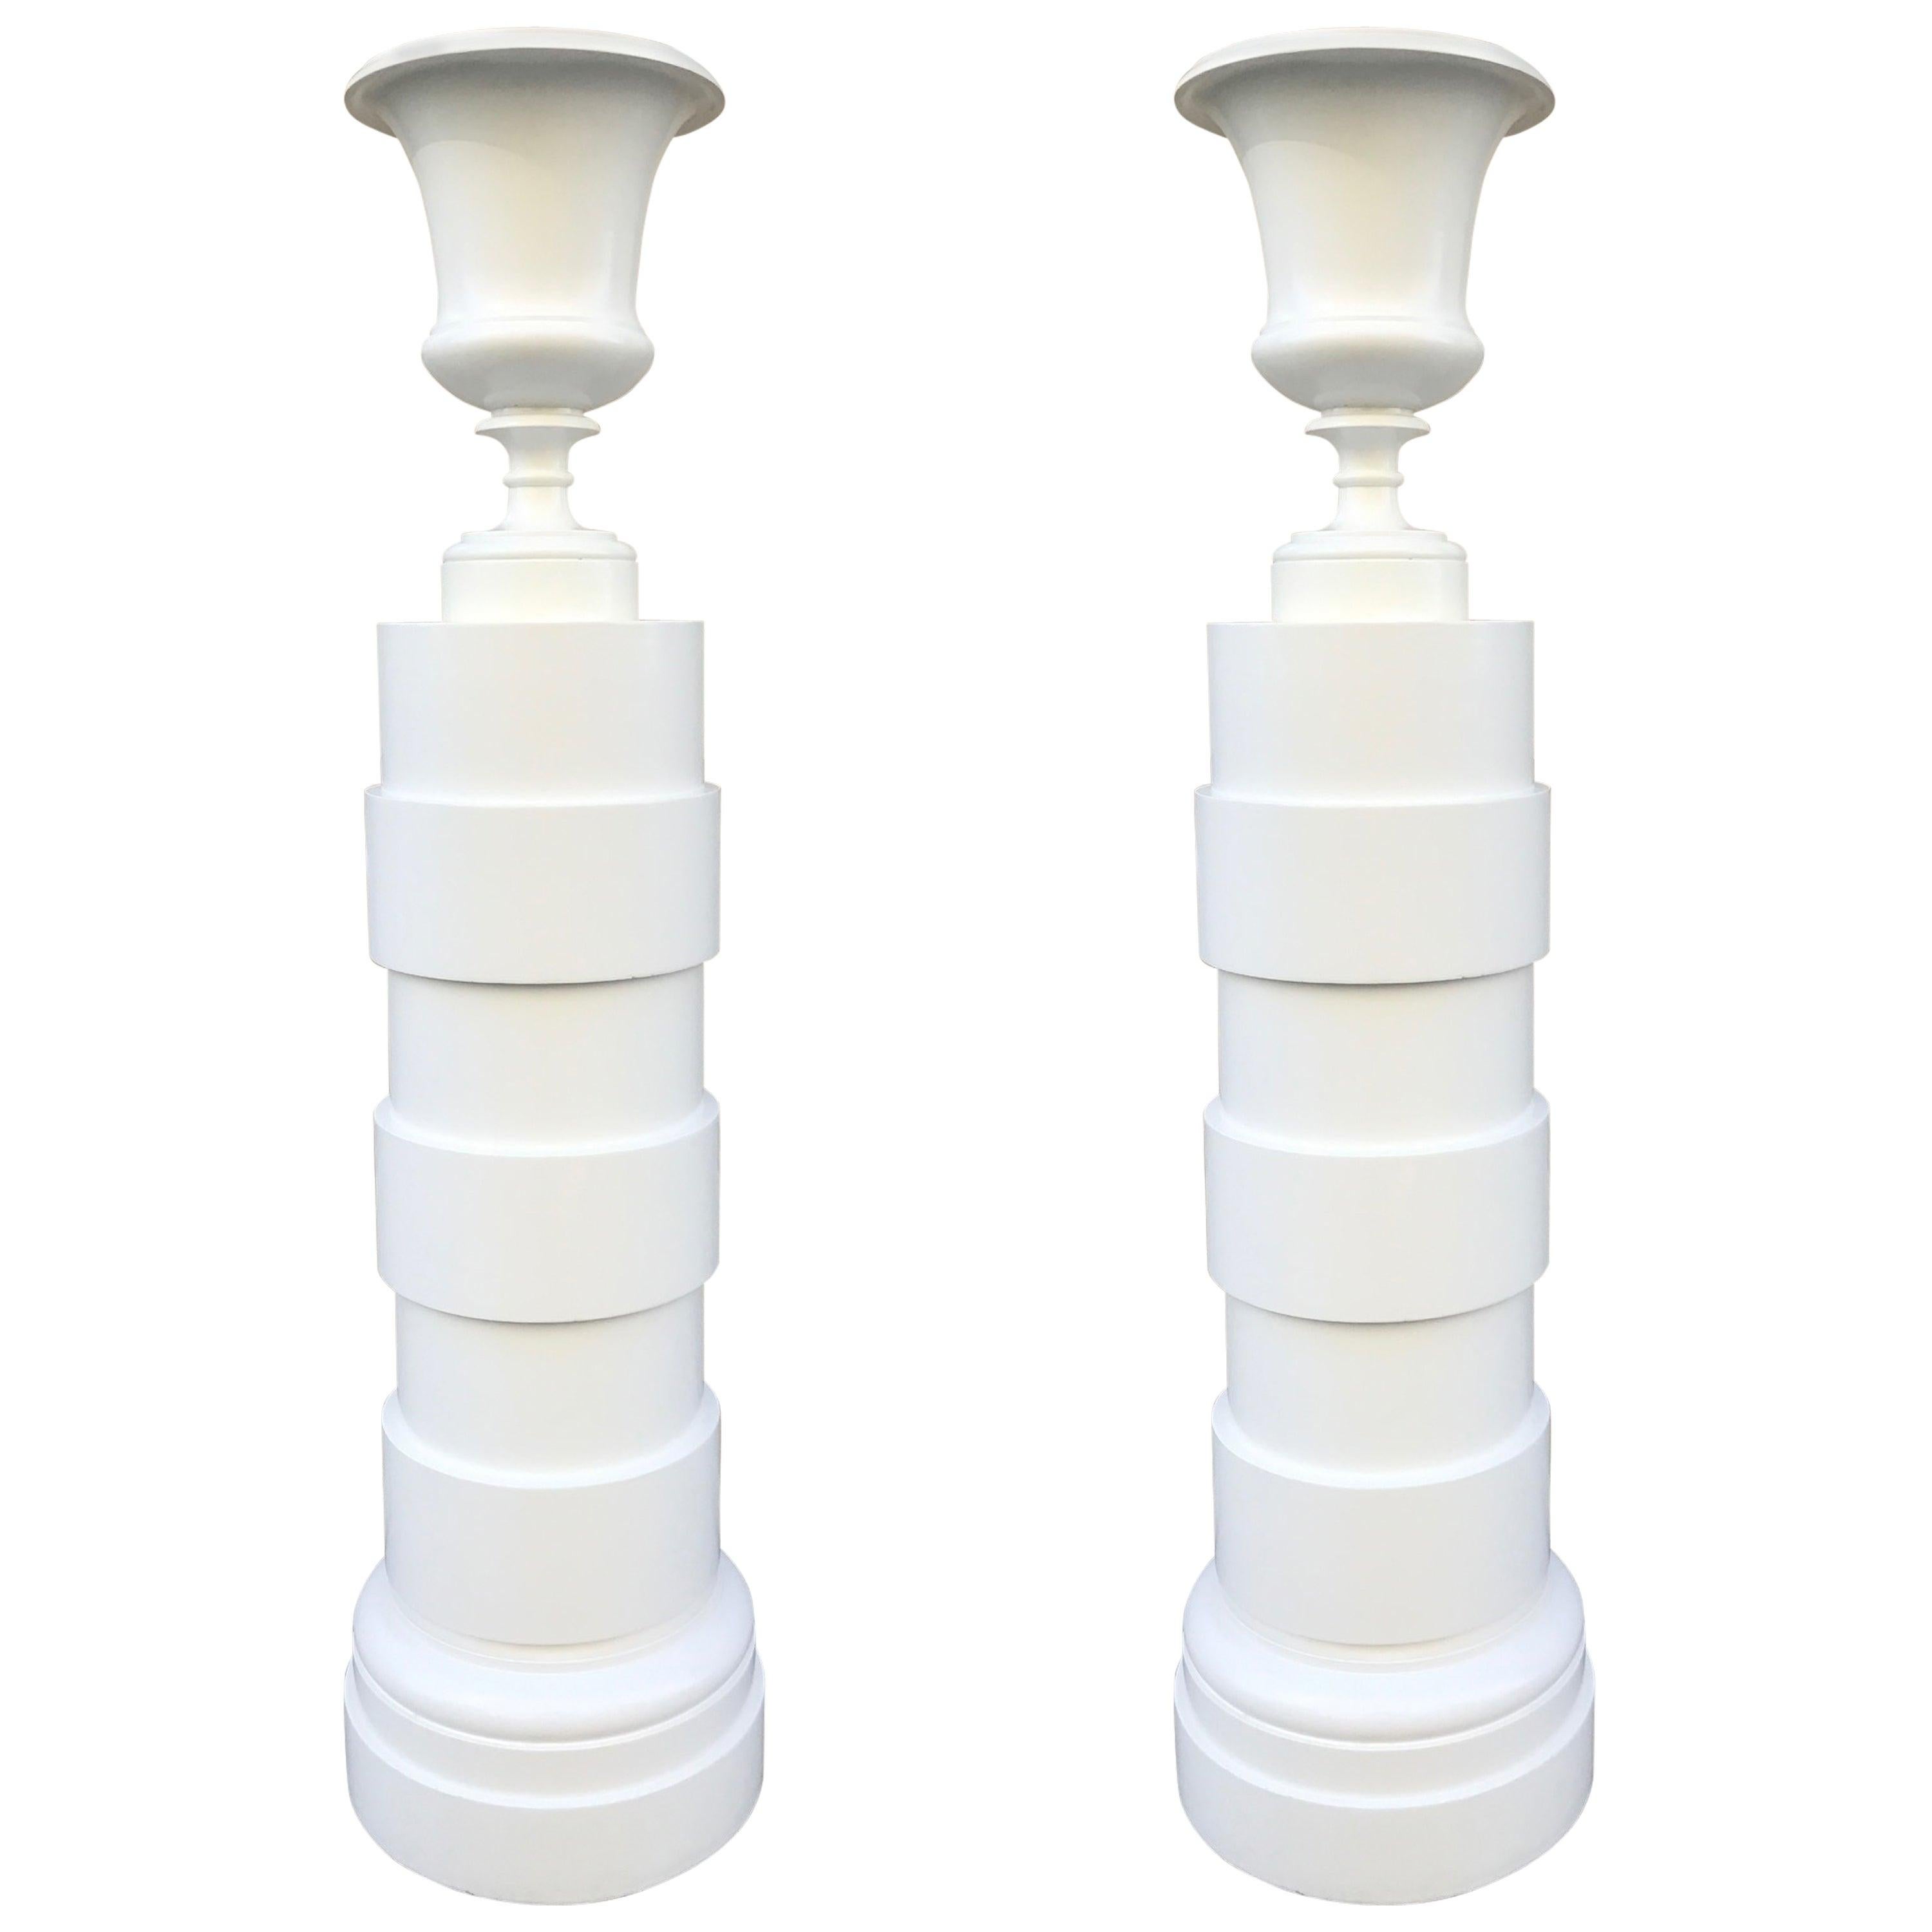 Pair of Urn and Columned Torchieres